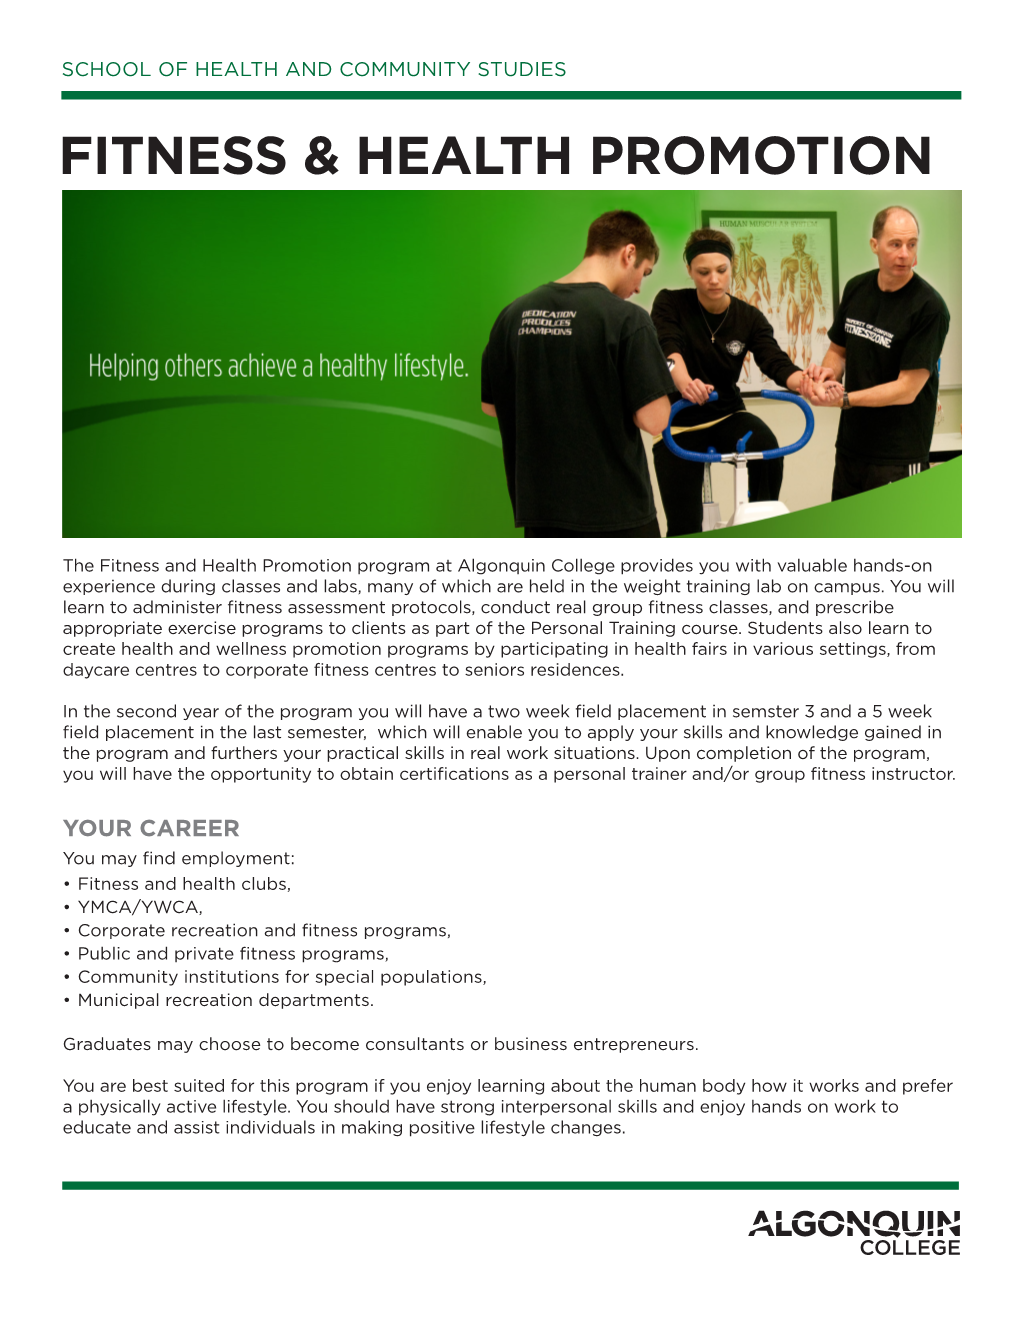 Fitness & Health Promotion